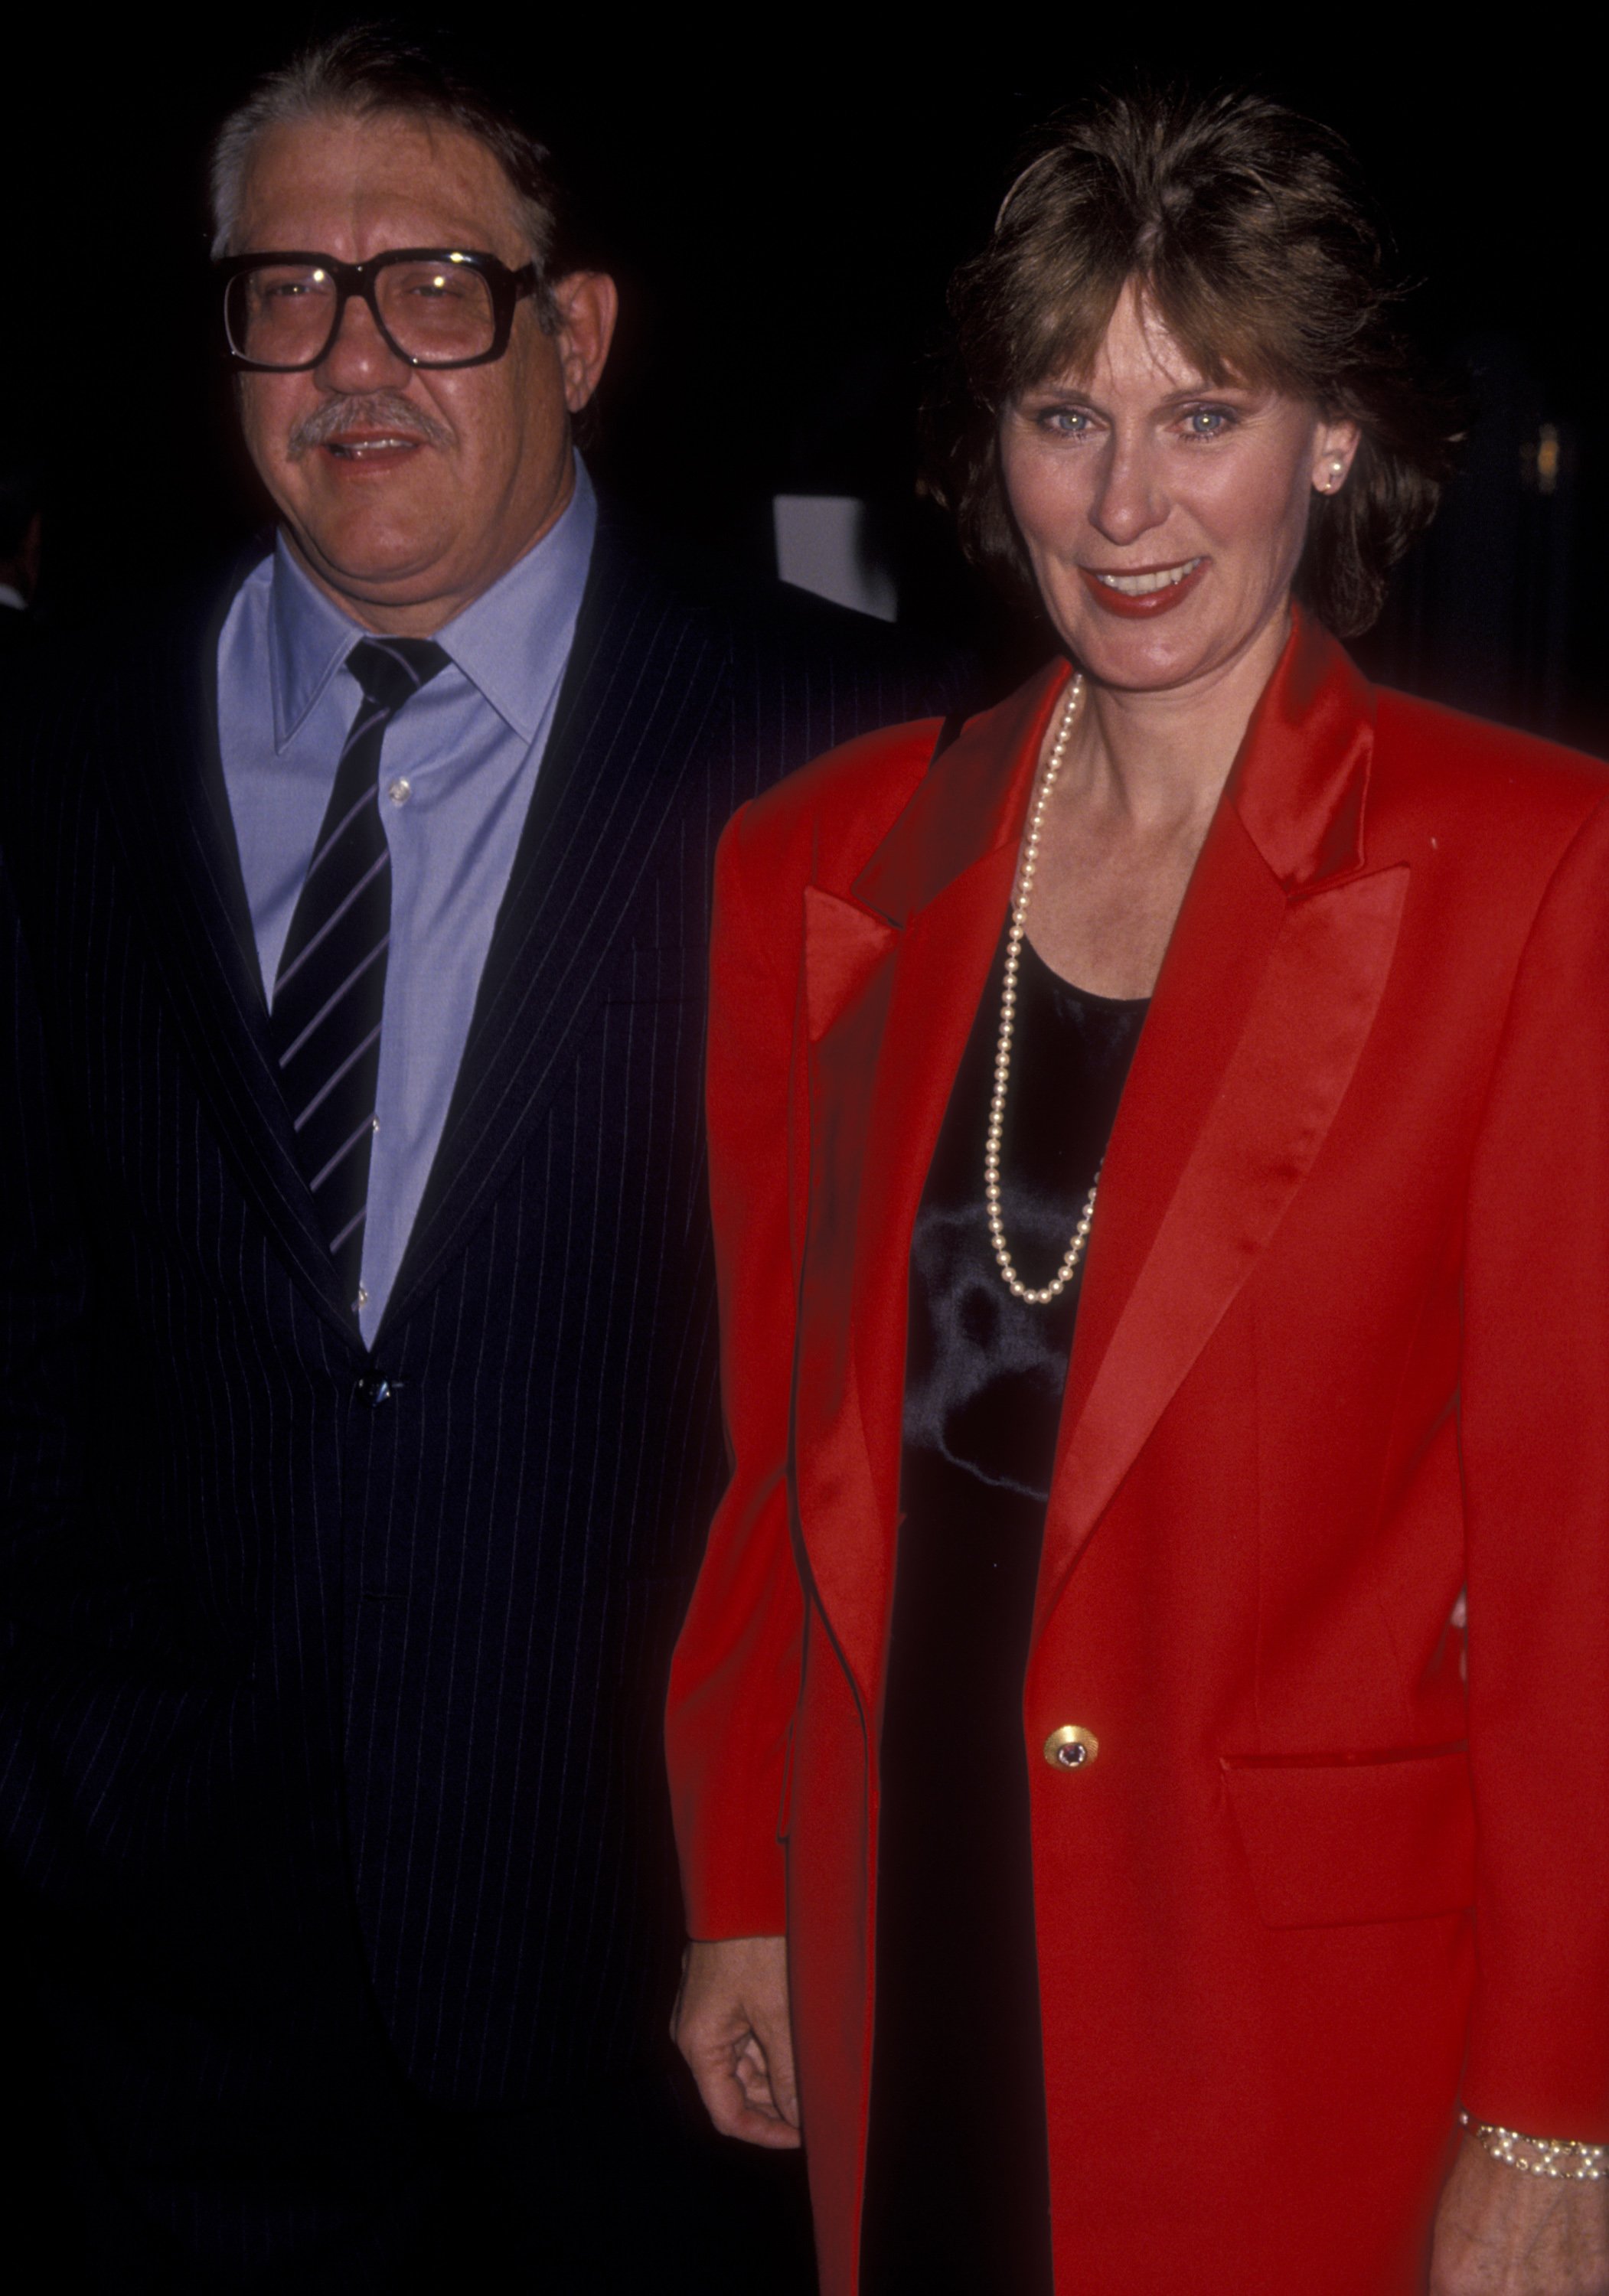 Actor Alex Karras and actress Susan Clark attend Writer's Guild of America Gala on October 24, 1993 at the Director's Guild Theater in Hollywood, California | Source: Getty Images